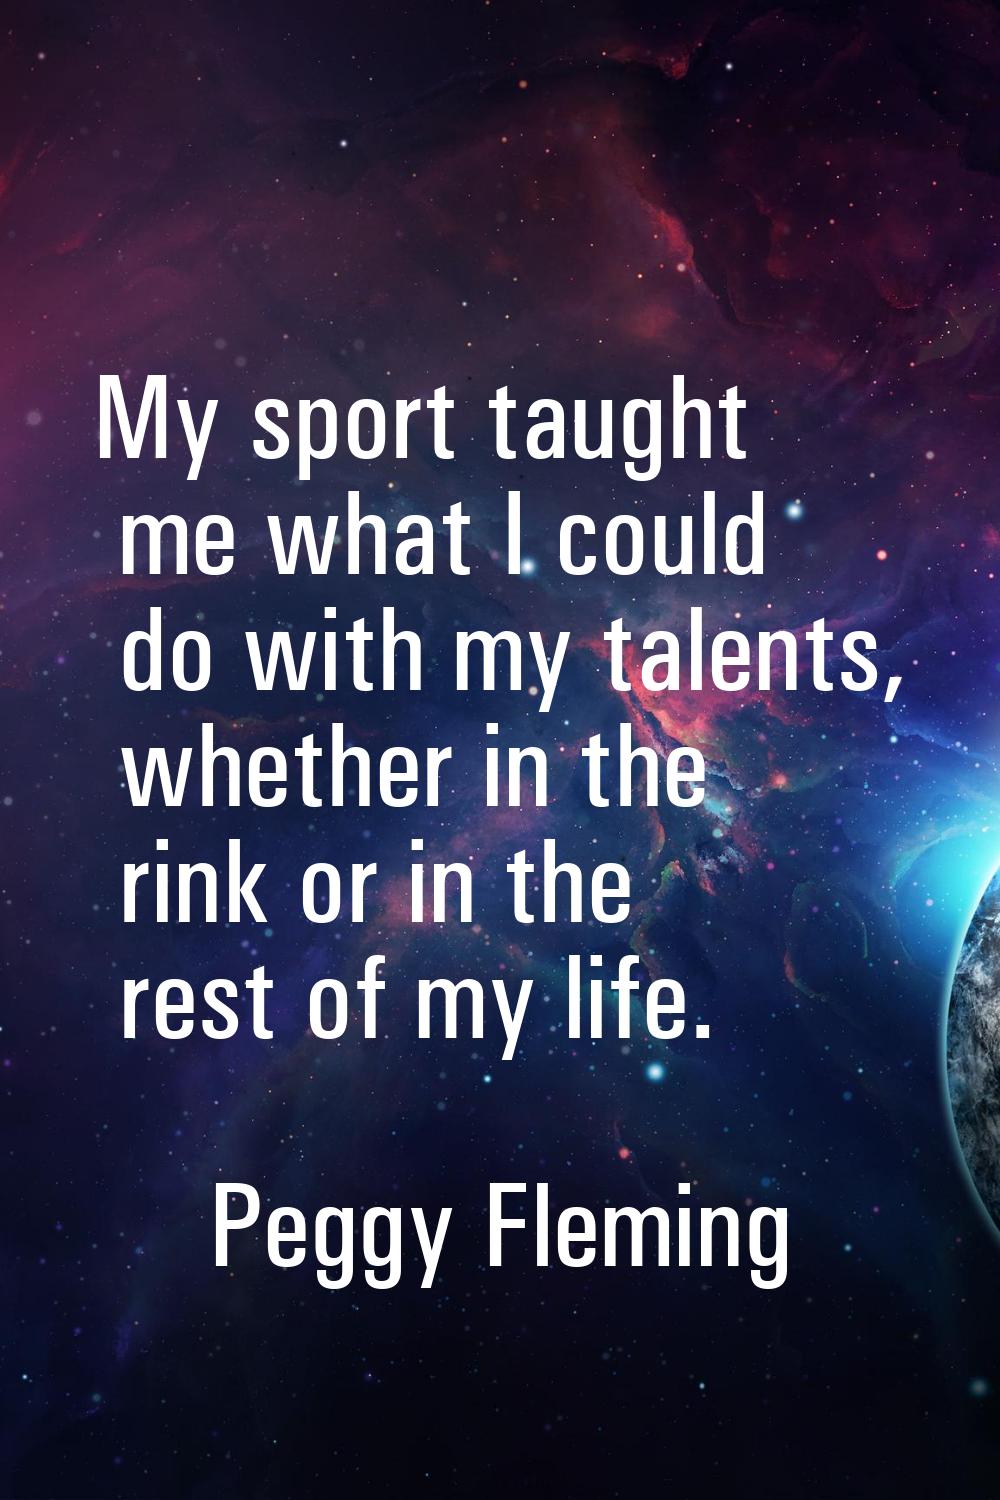 My sport taught me what I could do with my talents, whether in the rink or in the rest of my life.